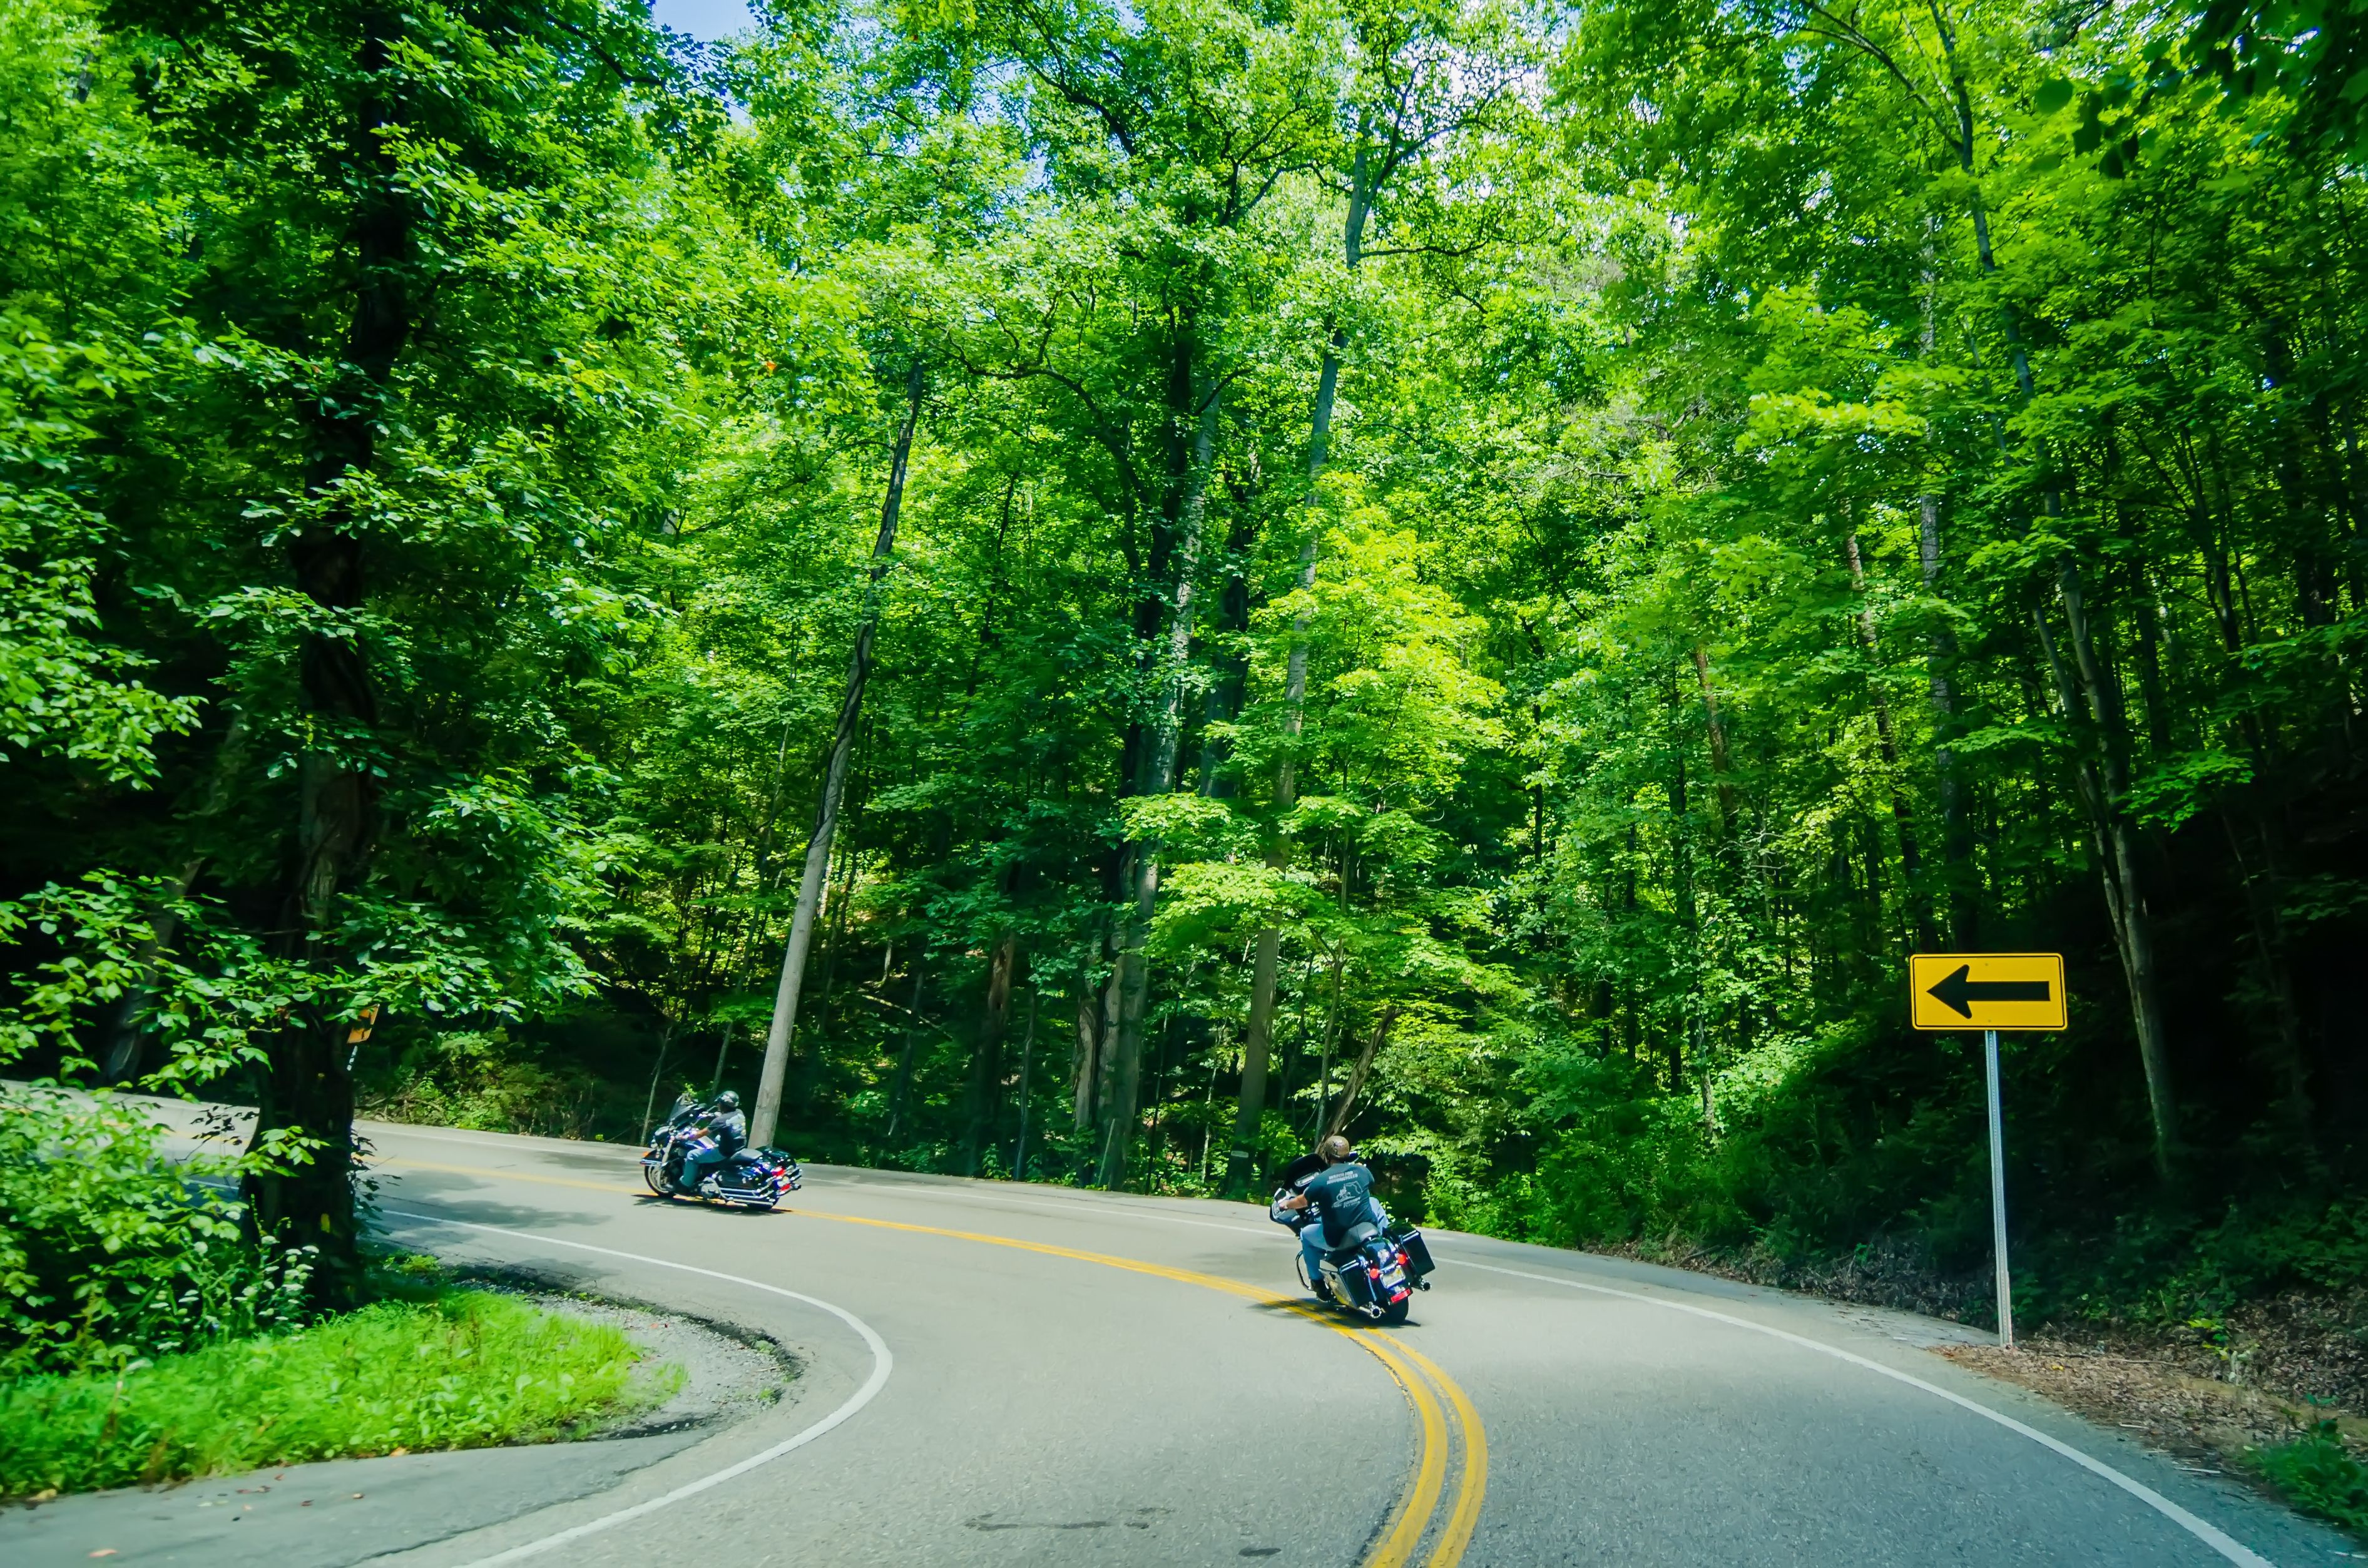 <p><b>Tennessee</b>The imposing-sounding <a href="https://tailofthedragon.com/">Tail of the Dragon</a> might be the most famous (or infamous) motorcycle route in the country. At just 11 miles, it's not long, but it packs in 318 curves in that short stretch. Make no mistake: The road is well maintained, but there are steep drop-offs and hair-raising hairpin turns aplenty, and most years see at least a couple of fatal crashes. "The ride is challenging, yet thrilling, and takes you through the mountains facing switchbacks and elevation changes, which as a sport bike rider is music to my ears," says Jason Lotoski, founder of <a href="https://www.tonit.com/">Tonit</a>, an app that connects motorcyclists. "This ride is one to add to your bucket list for sure."</p>  <p><b>Can't-miss stop: </b>The road skirts the southwestern edge of the Great Smoky Mountains National Park. Slow down on a trail and take in the stunning mountain vistas before or after your ride.</p><p><b>For more great travel guides and vacation tips,</b> <a href="https://cheapism.us14.list-manage.com/subscribe?u=de966e79b38e1d833d5781074&id=c14db36dd0">please sign up for our free newsletters</a>.</p>